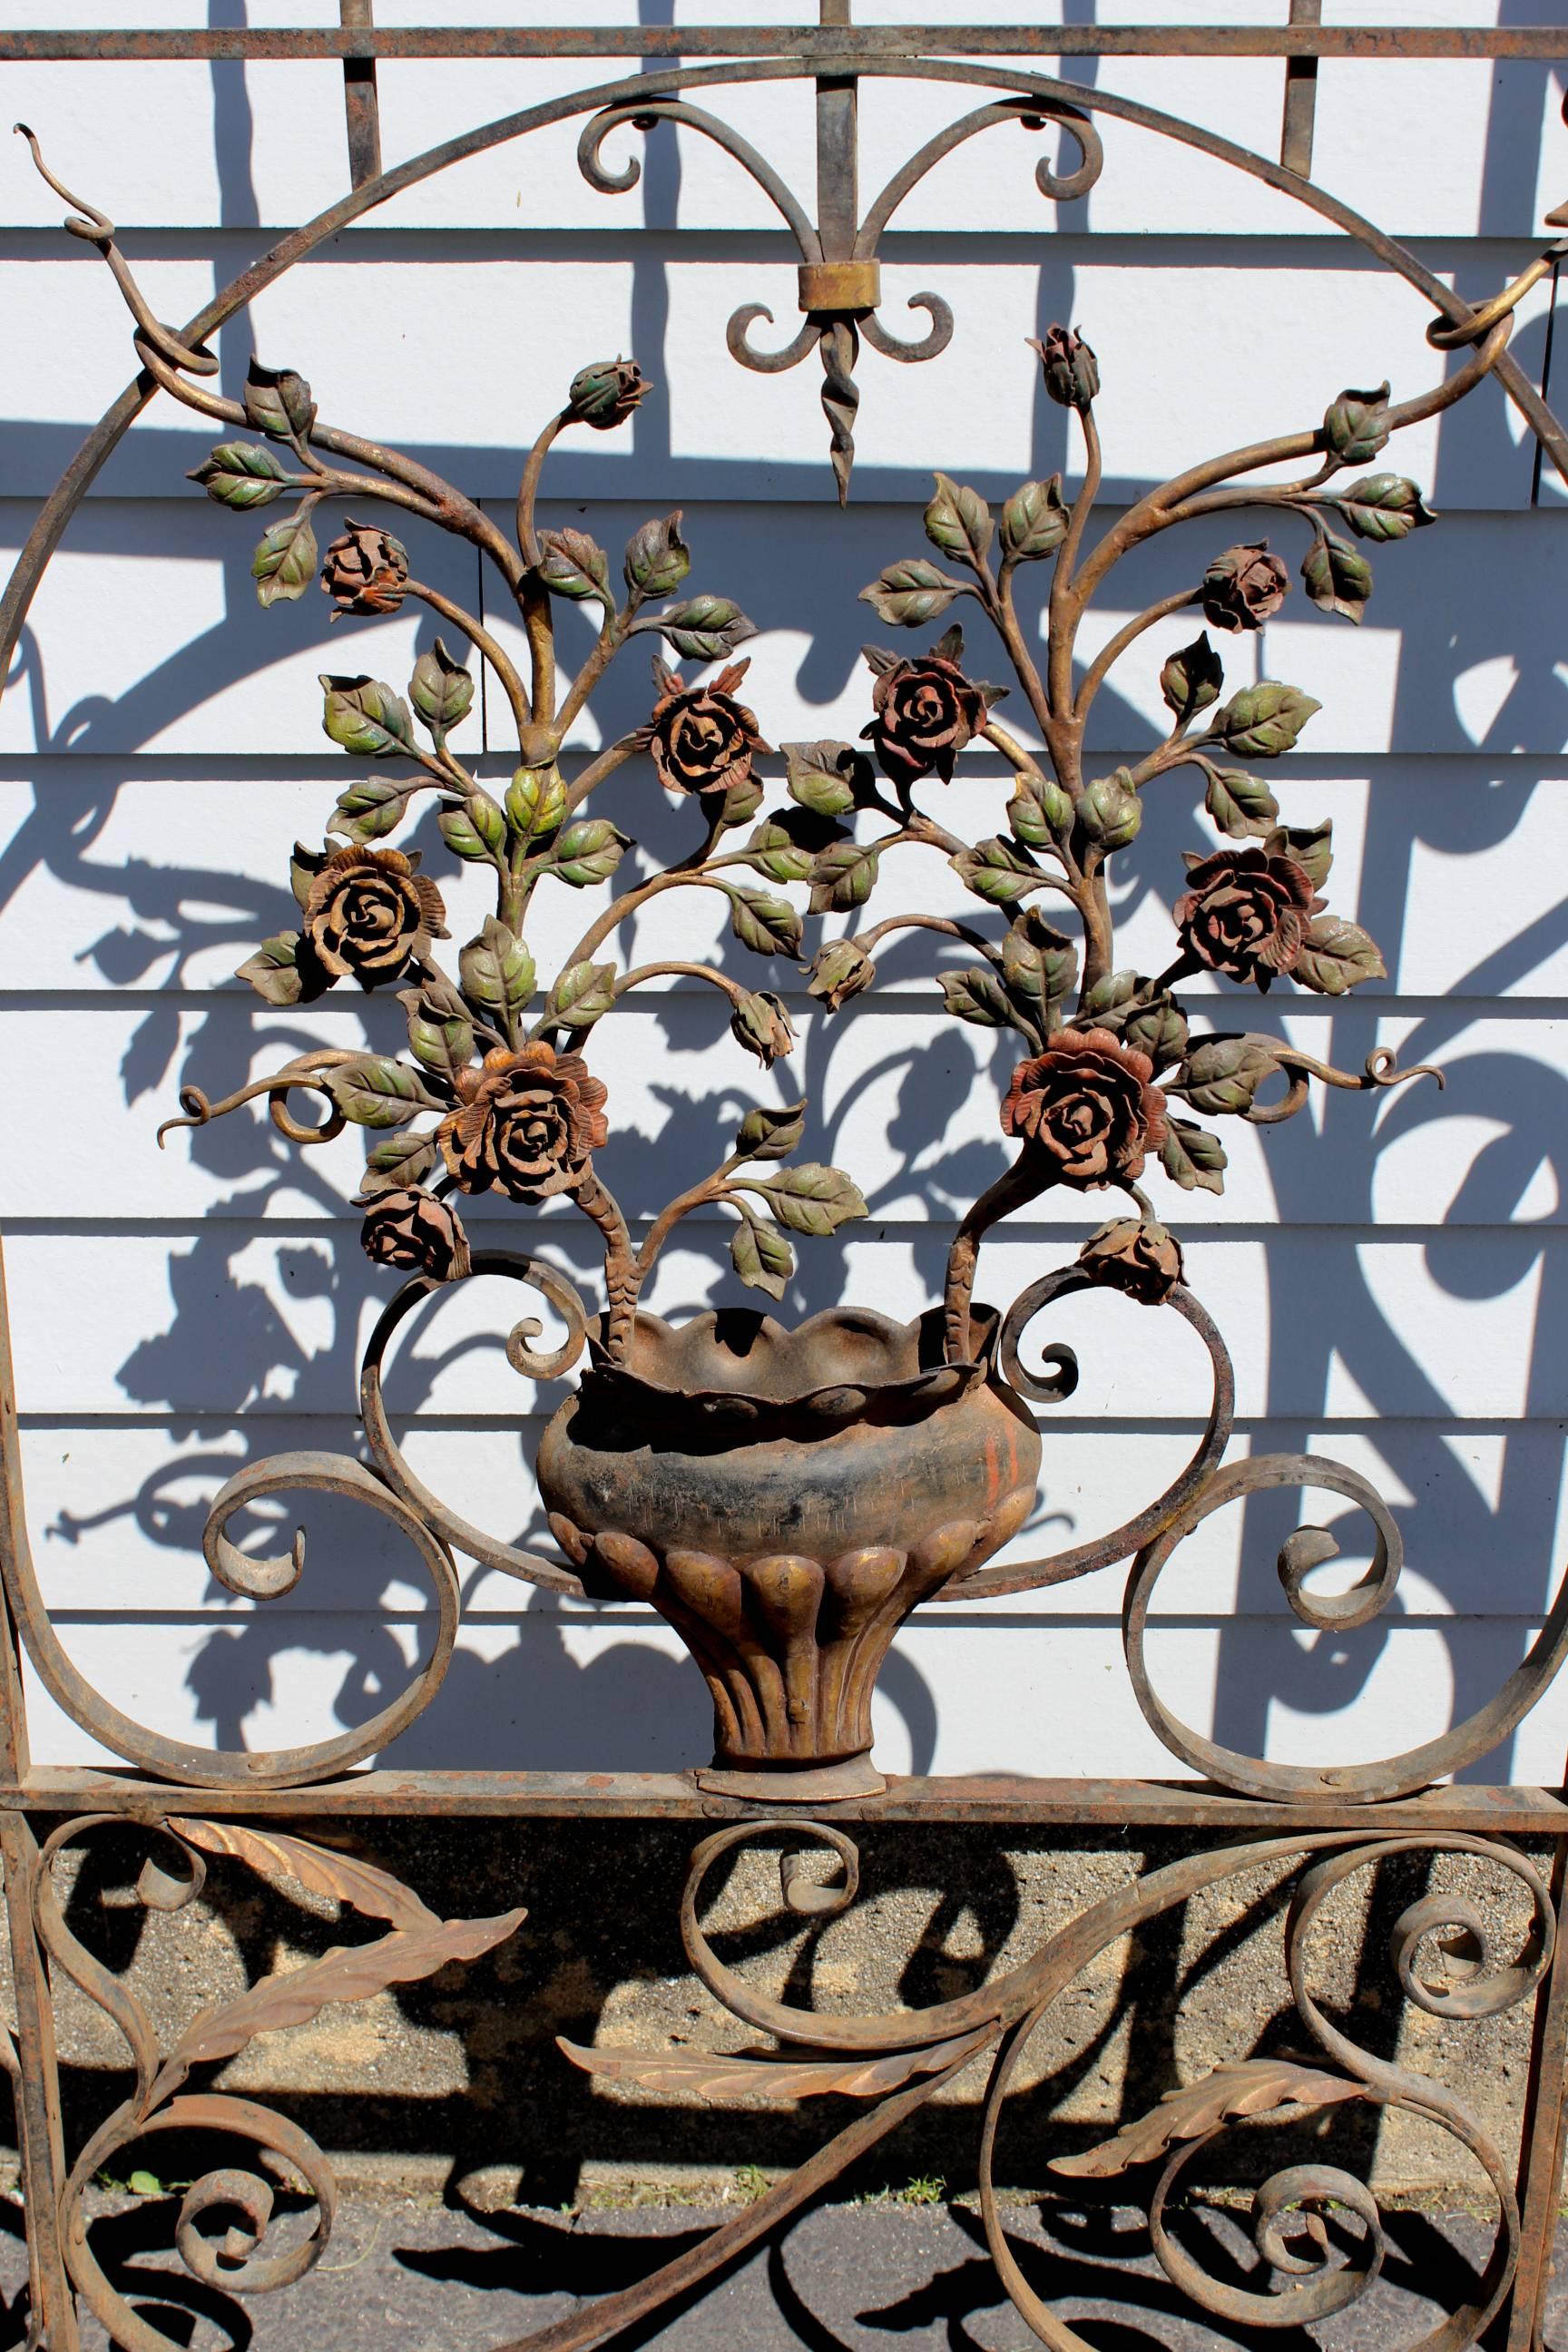 Polychromed Pair of Polychrome Iron Garden Gates with Urn and Rose Decoration